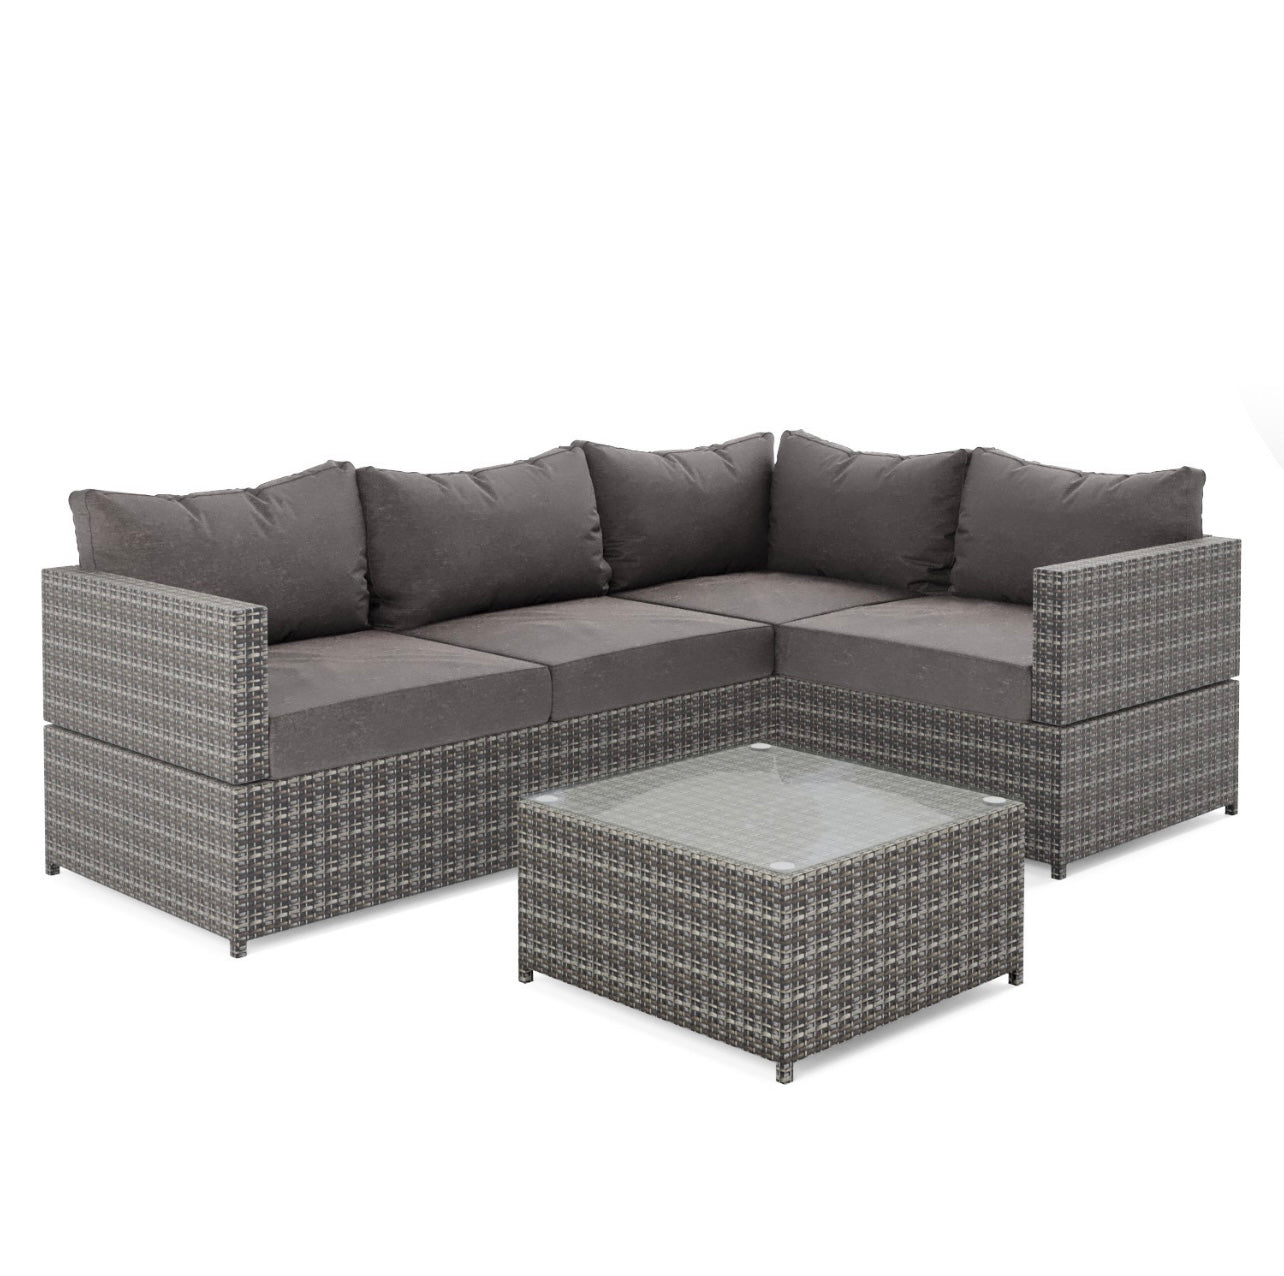 Rattan Garden Sofa Set in Grey with Cushions and Table Outdoor Patio